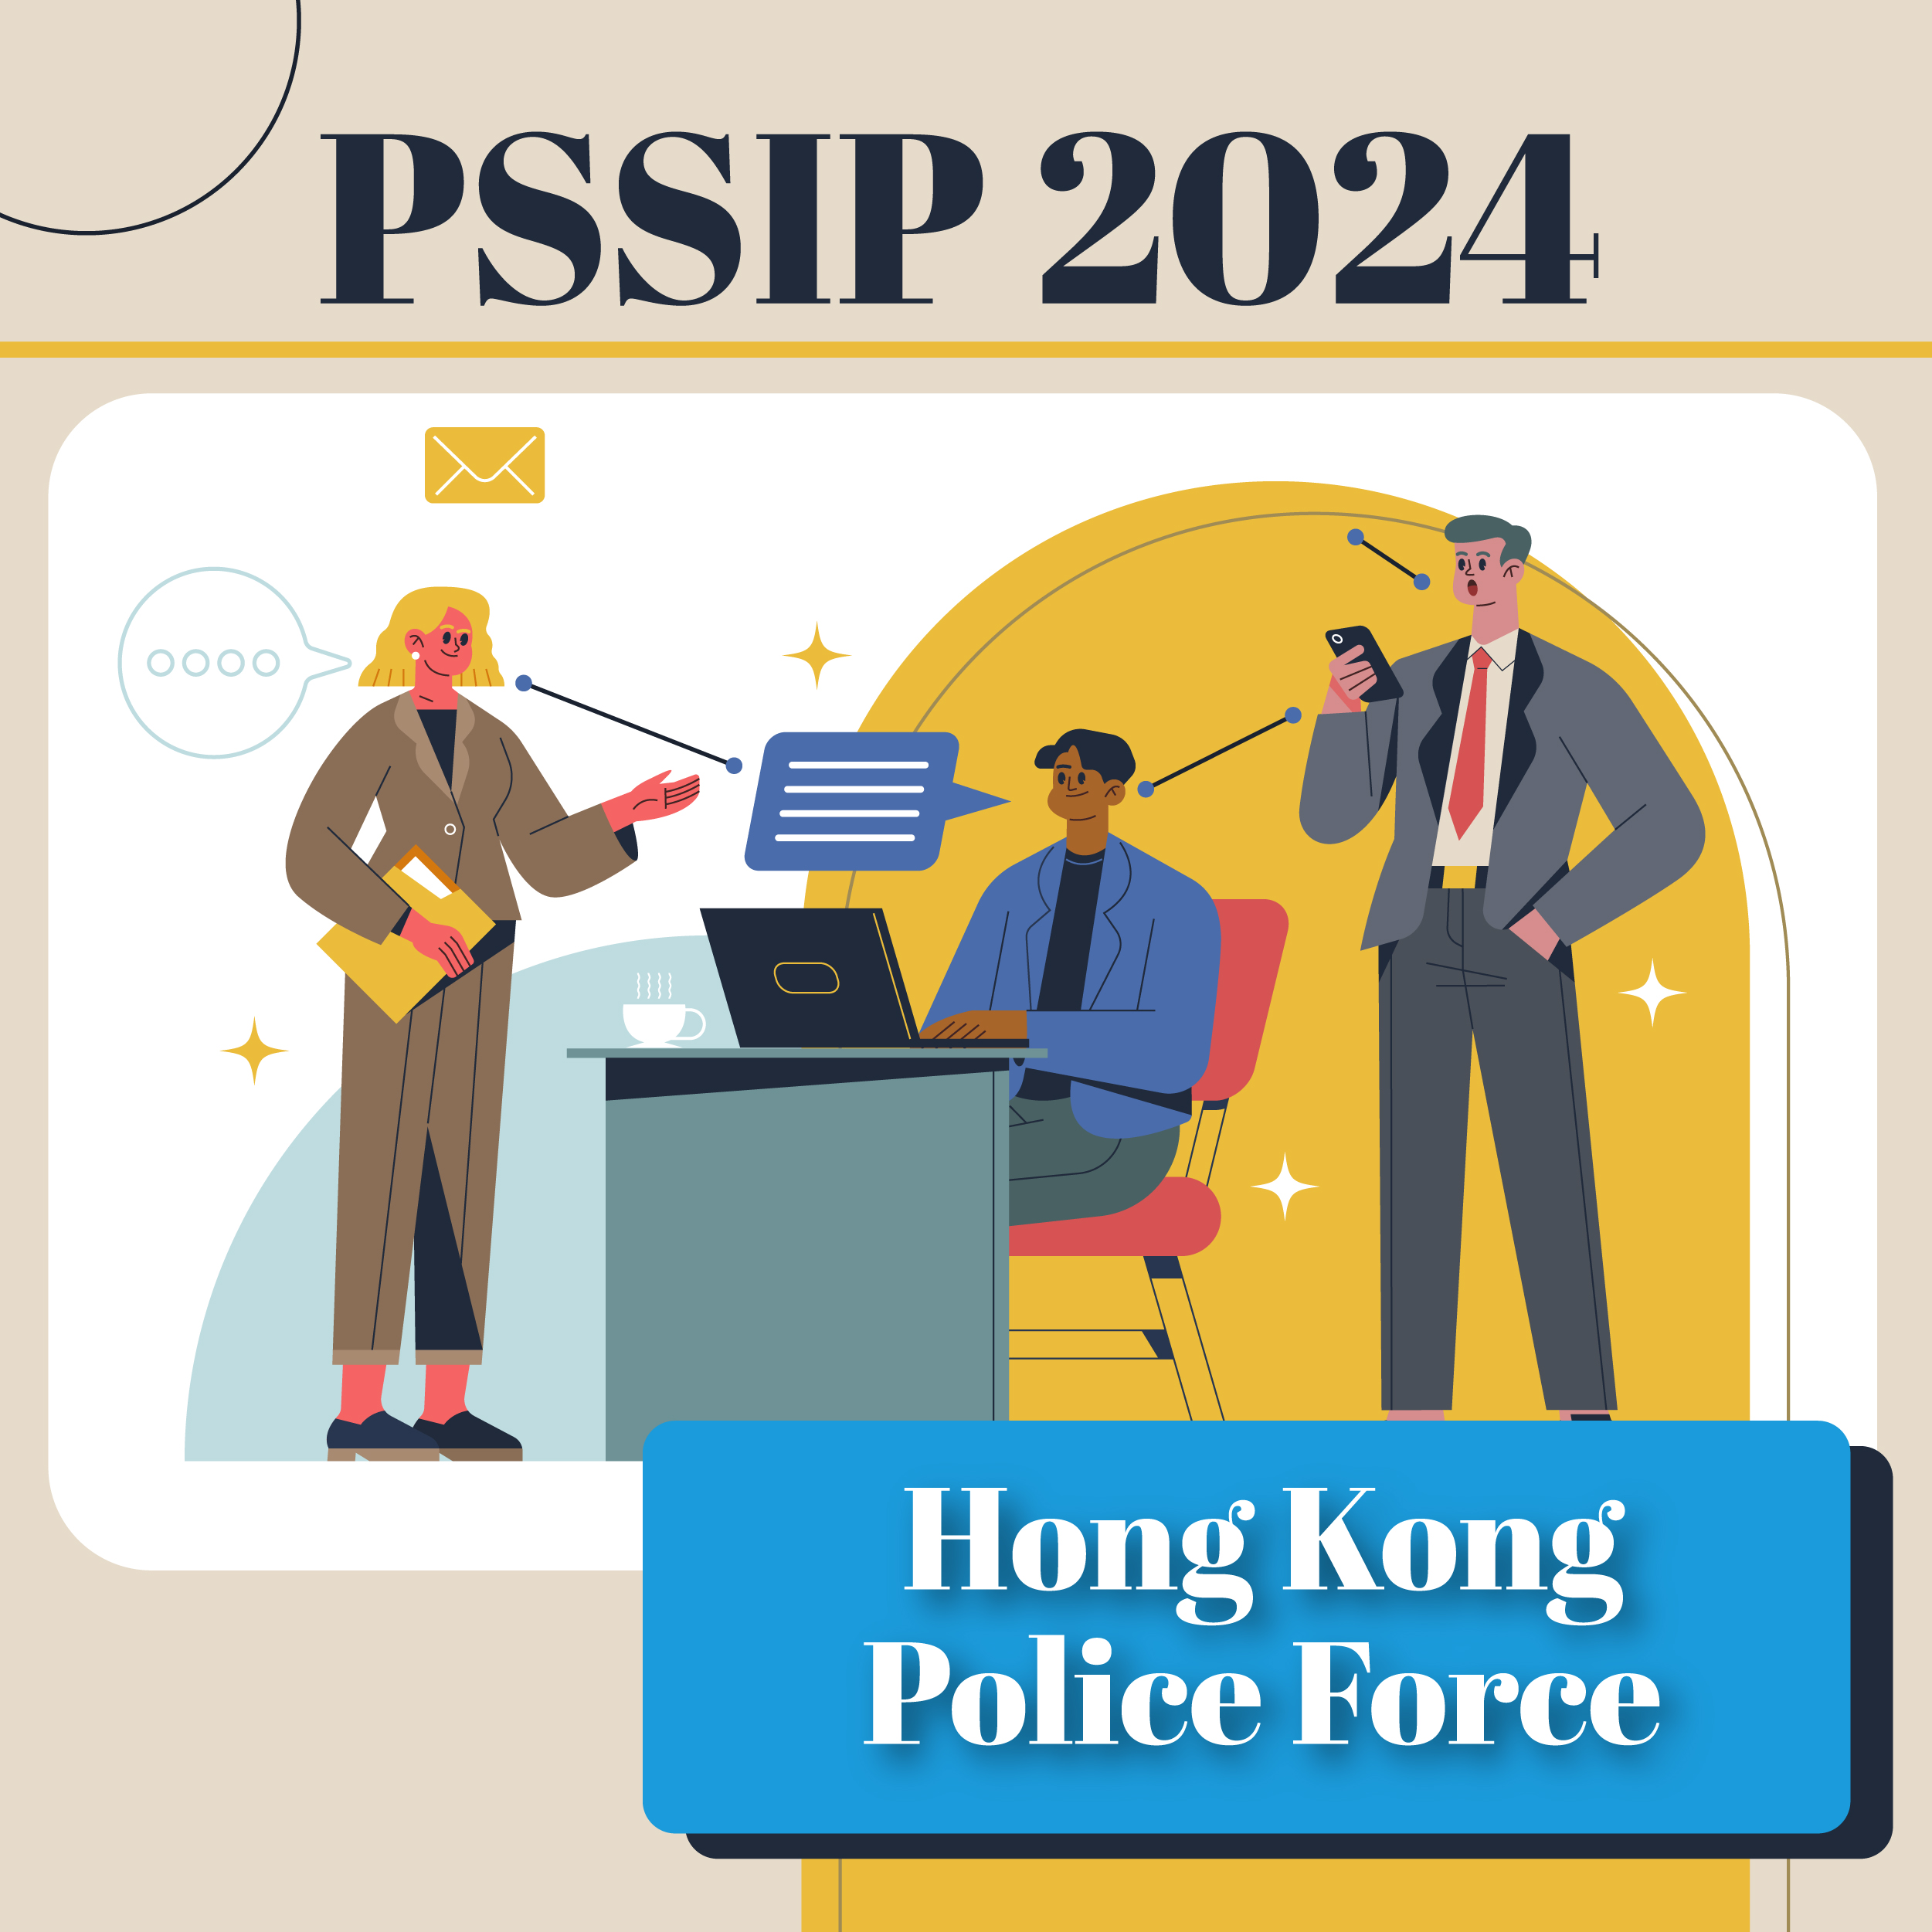 PSSIP2024 – Public Relations Wing, HKPF